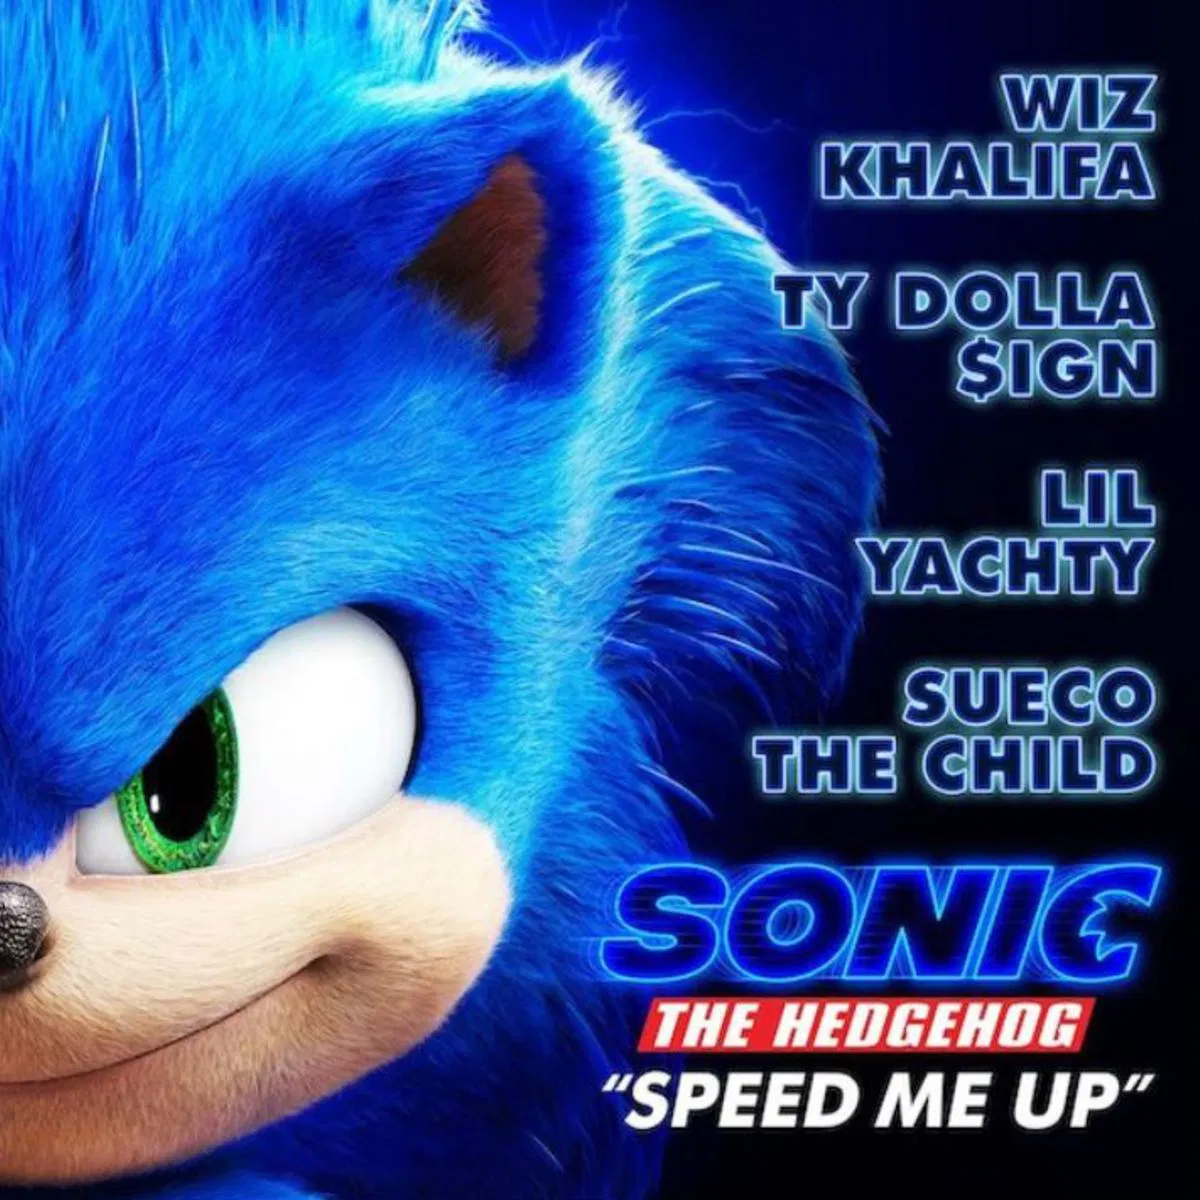 Wiz Khalifa Ft. Ty Dolla $ign, Sueco the Child & Lil Yachty – Speed Me Up (From “Sonic the Hedgehog”)